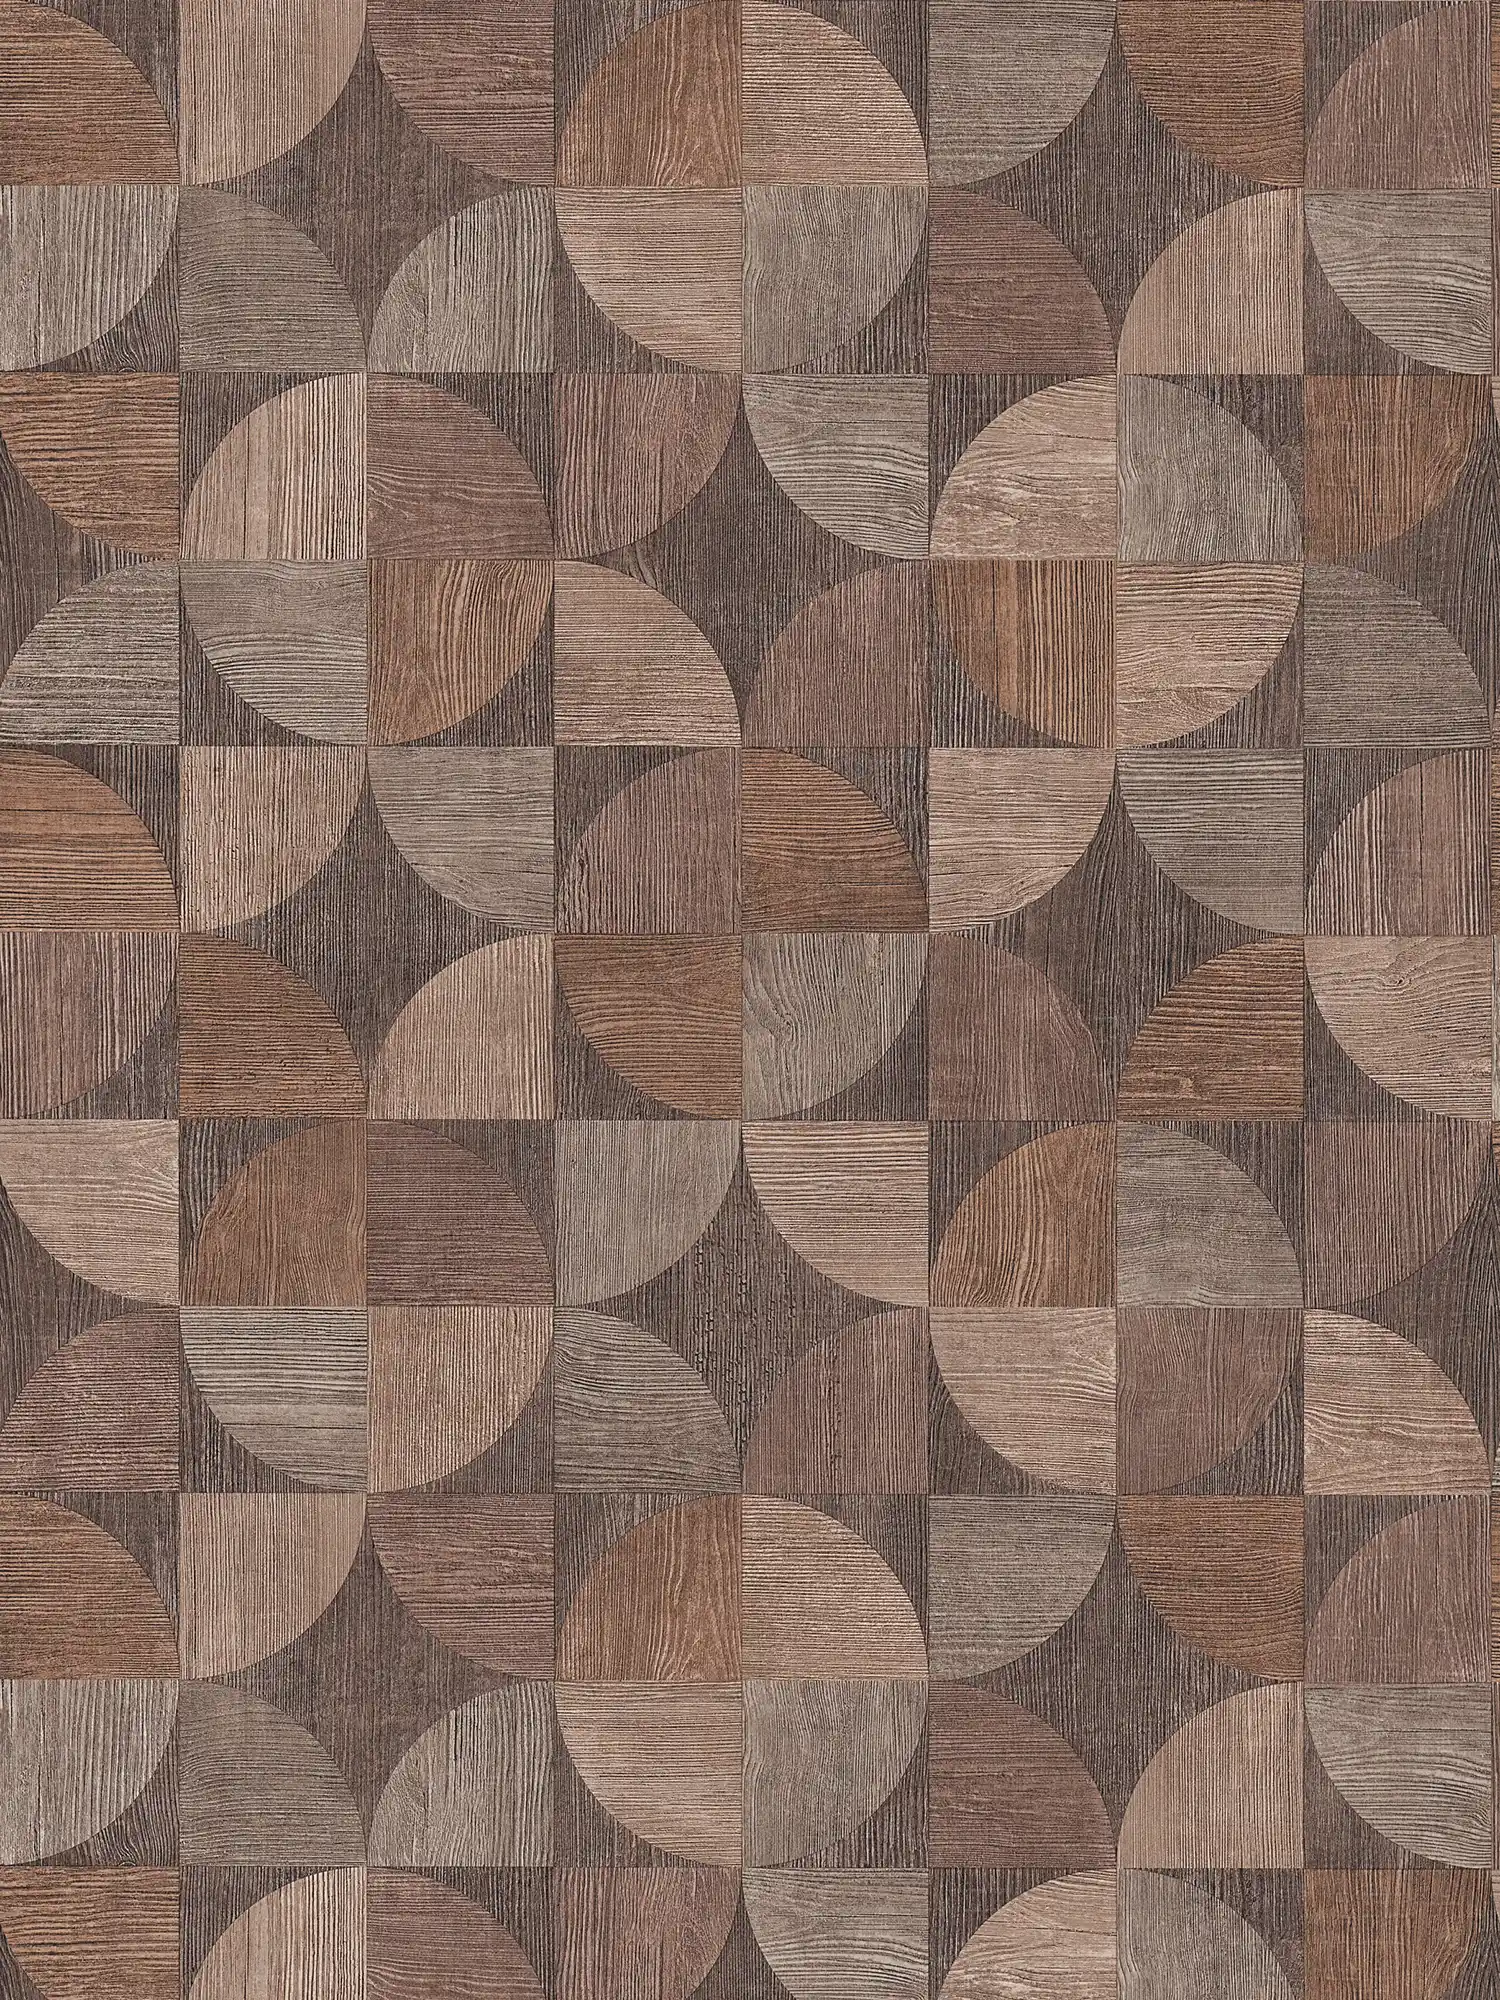         Wallpaper with graphic pattern in wood look - brown, beige, grey
    